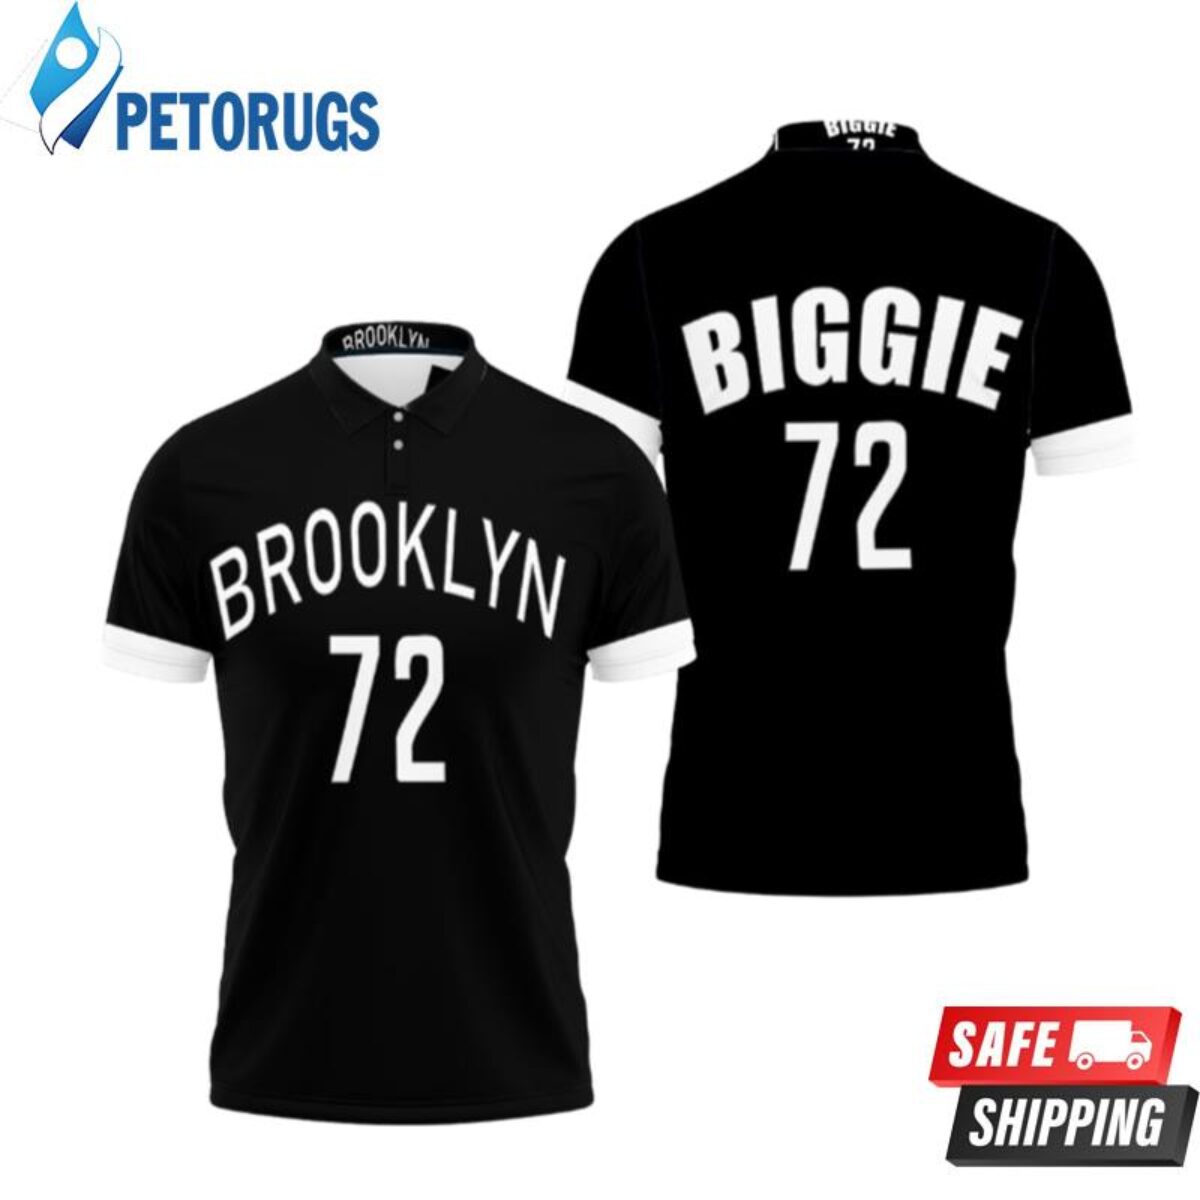 The Nets' City Edition Uniforms Are Inspired By The Notorious B.I.G.